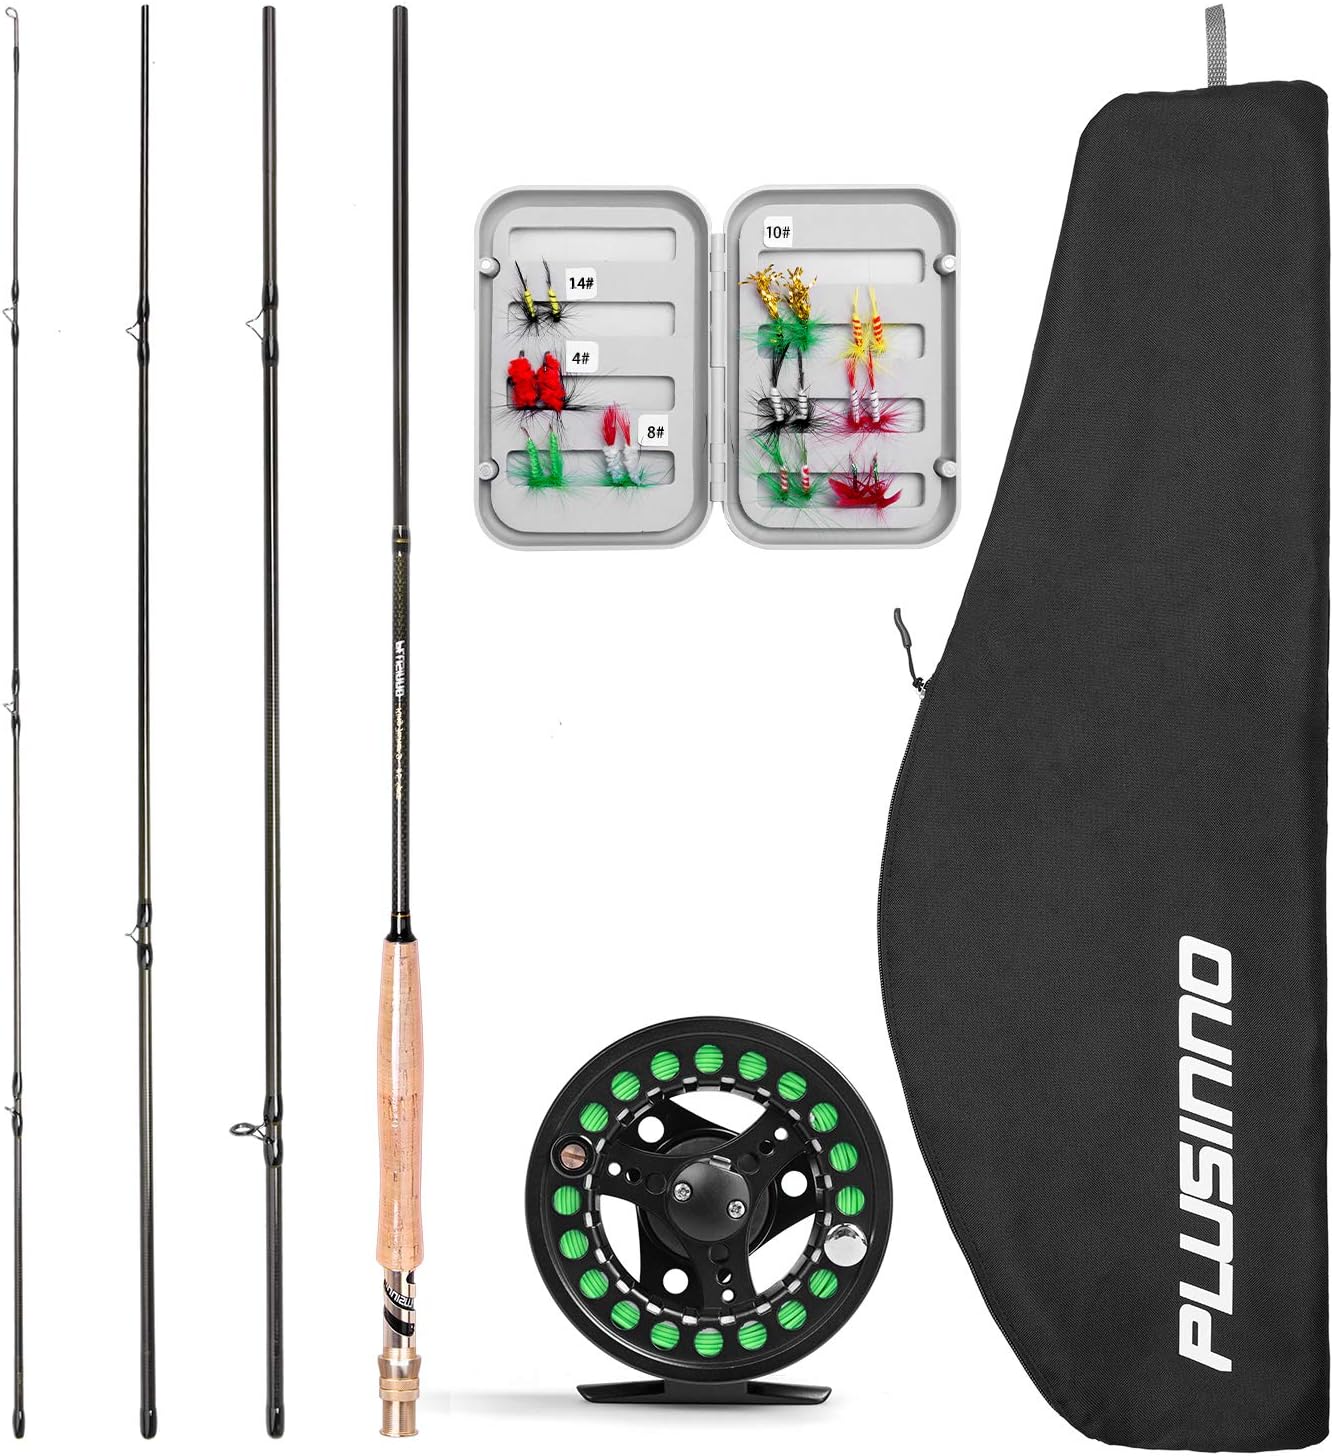 PLUSINNO Fly Fishing Rod and Reel Combo, 4 Piece Lightweight Ultra-Portable  Graphite Fly Rod 5/6 Complete Starter Package with Carrier Bag - 5 Wt -9